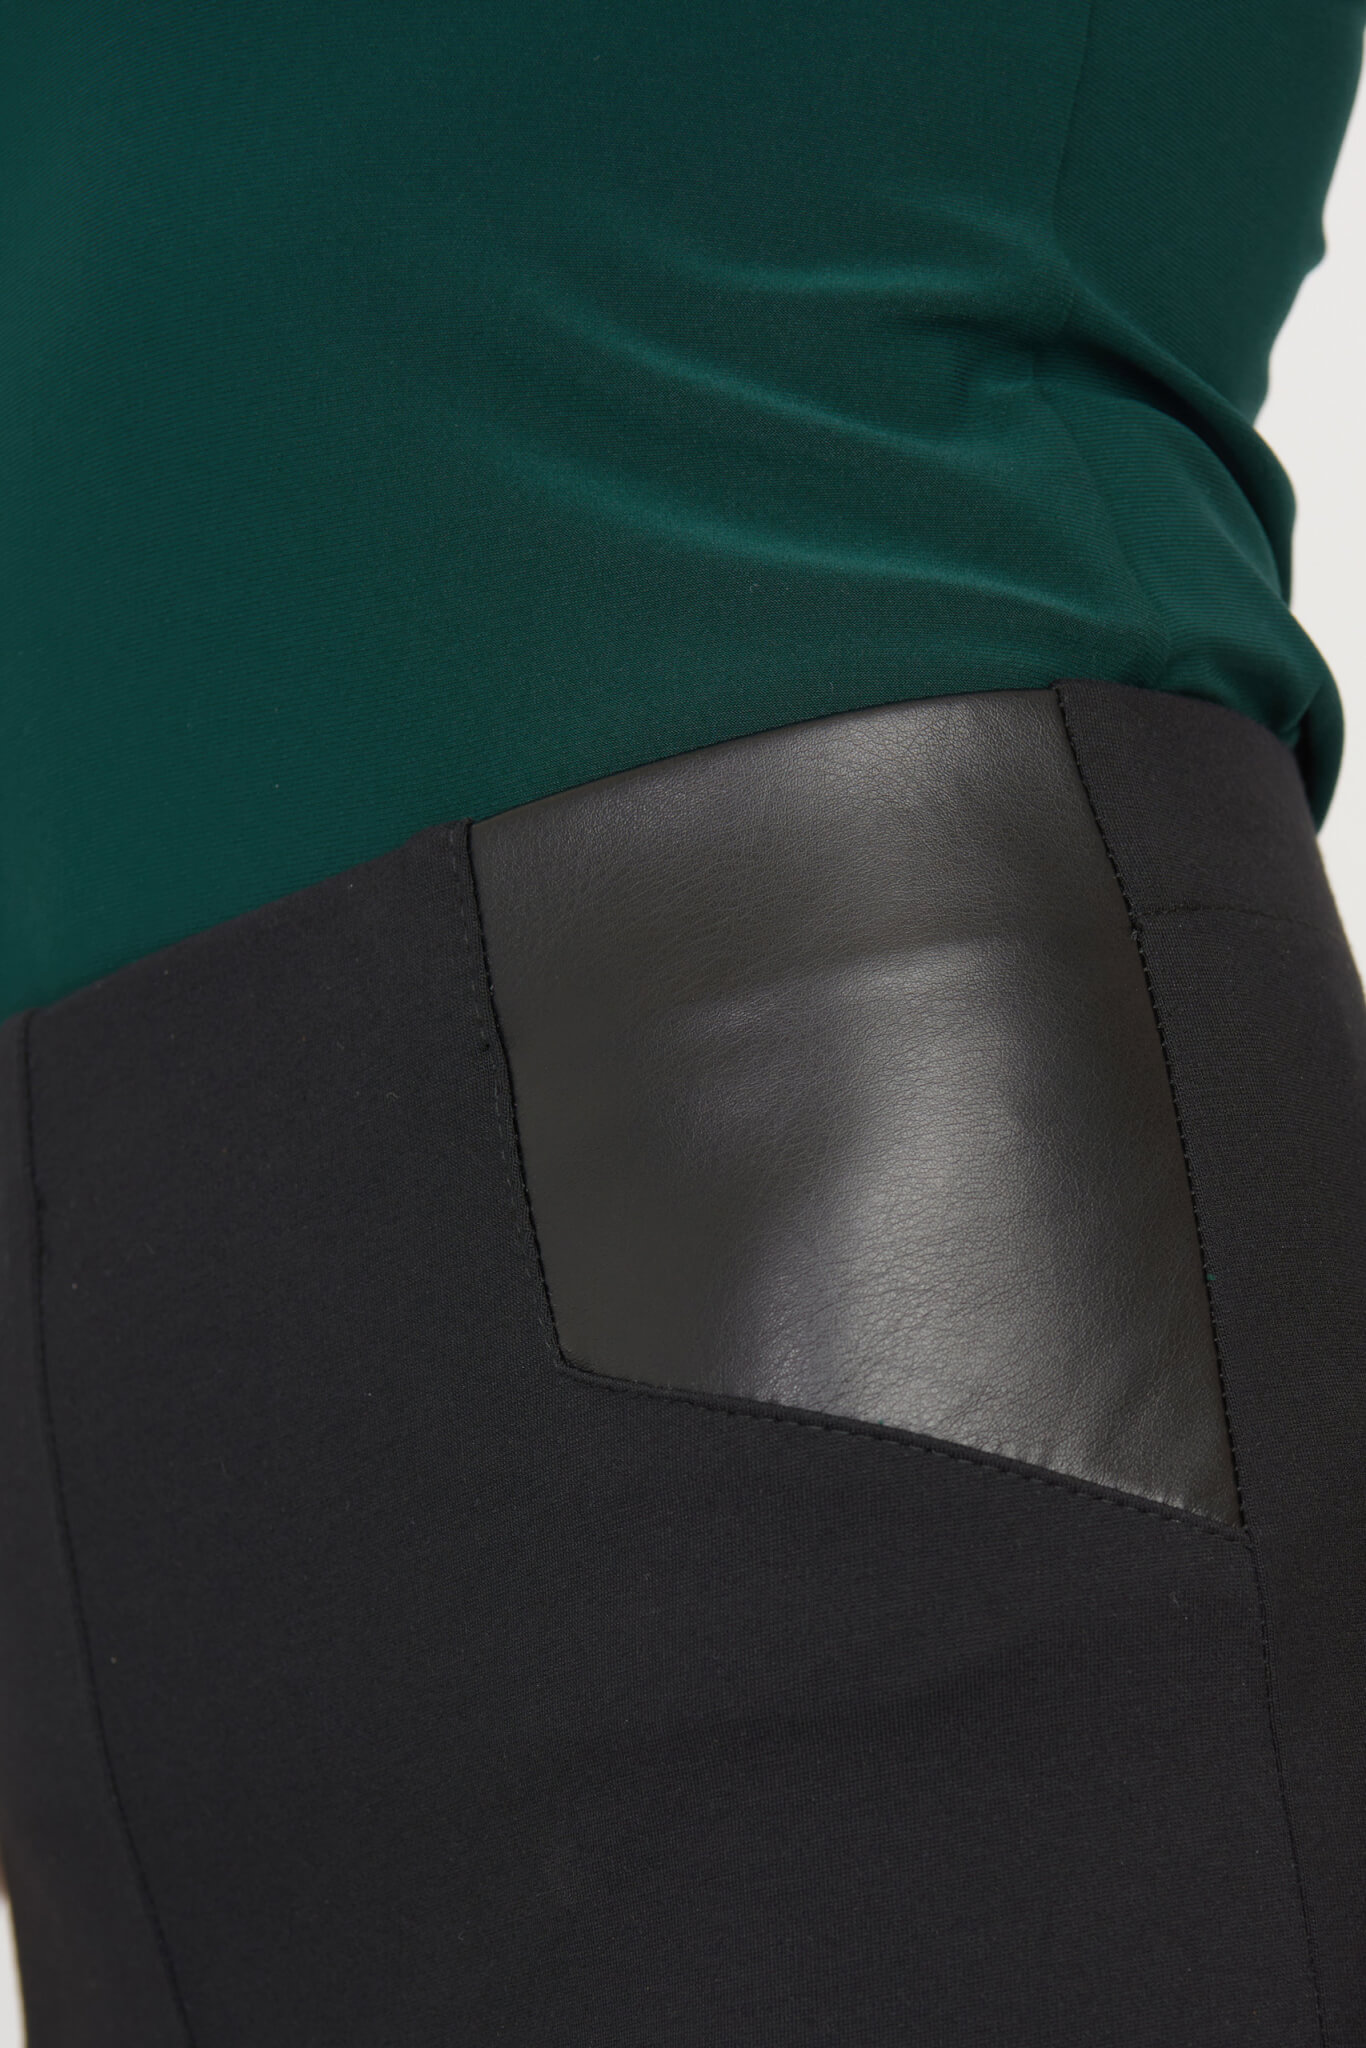 Black Pant with Faux Leather Trim | Everard's Clothing